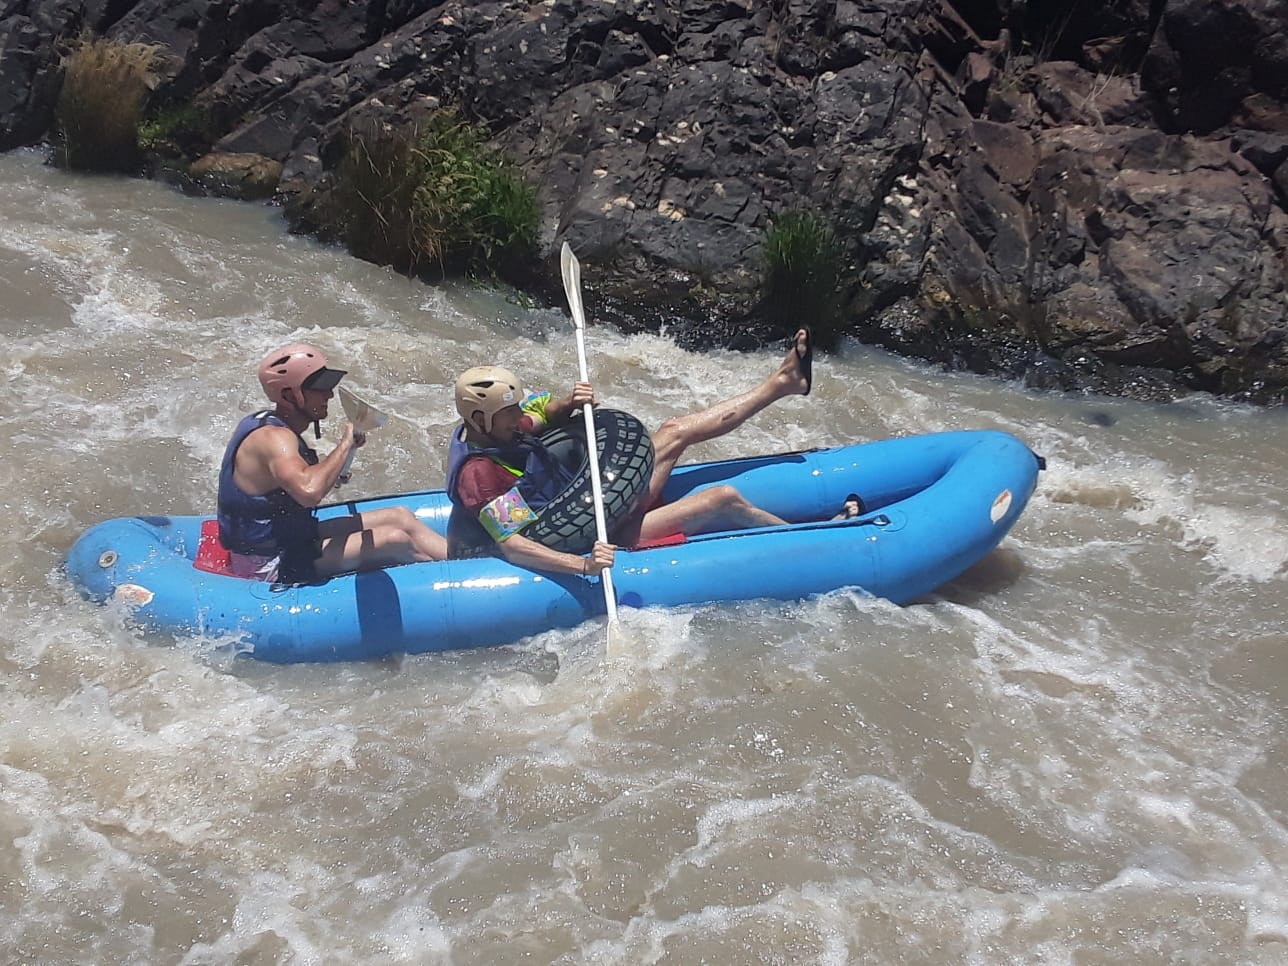 Bachelor party bachelorette conference teambuilding river rafting south Africa